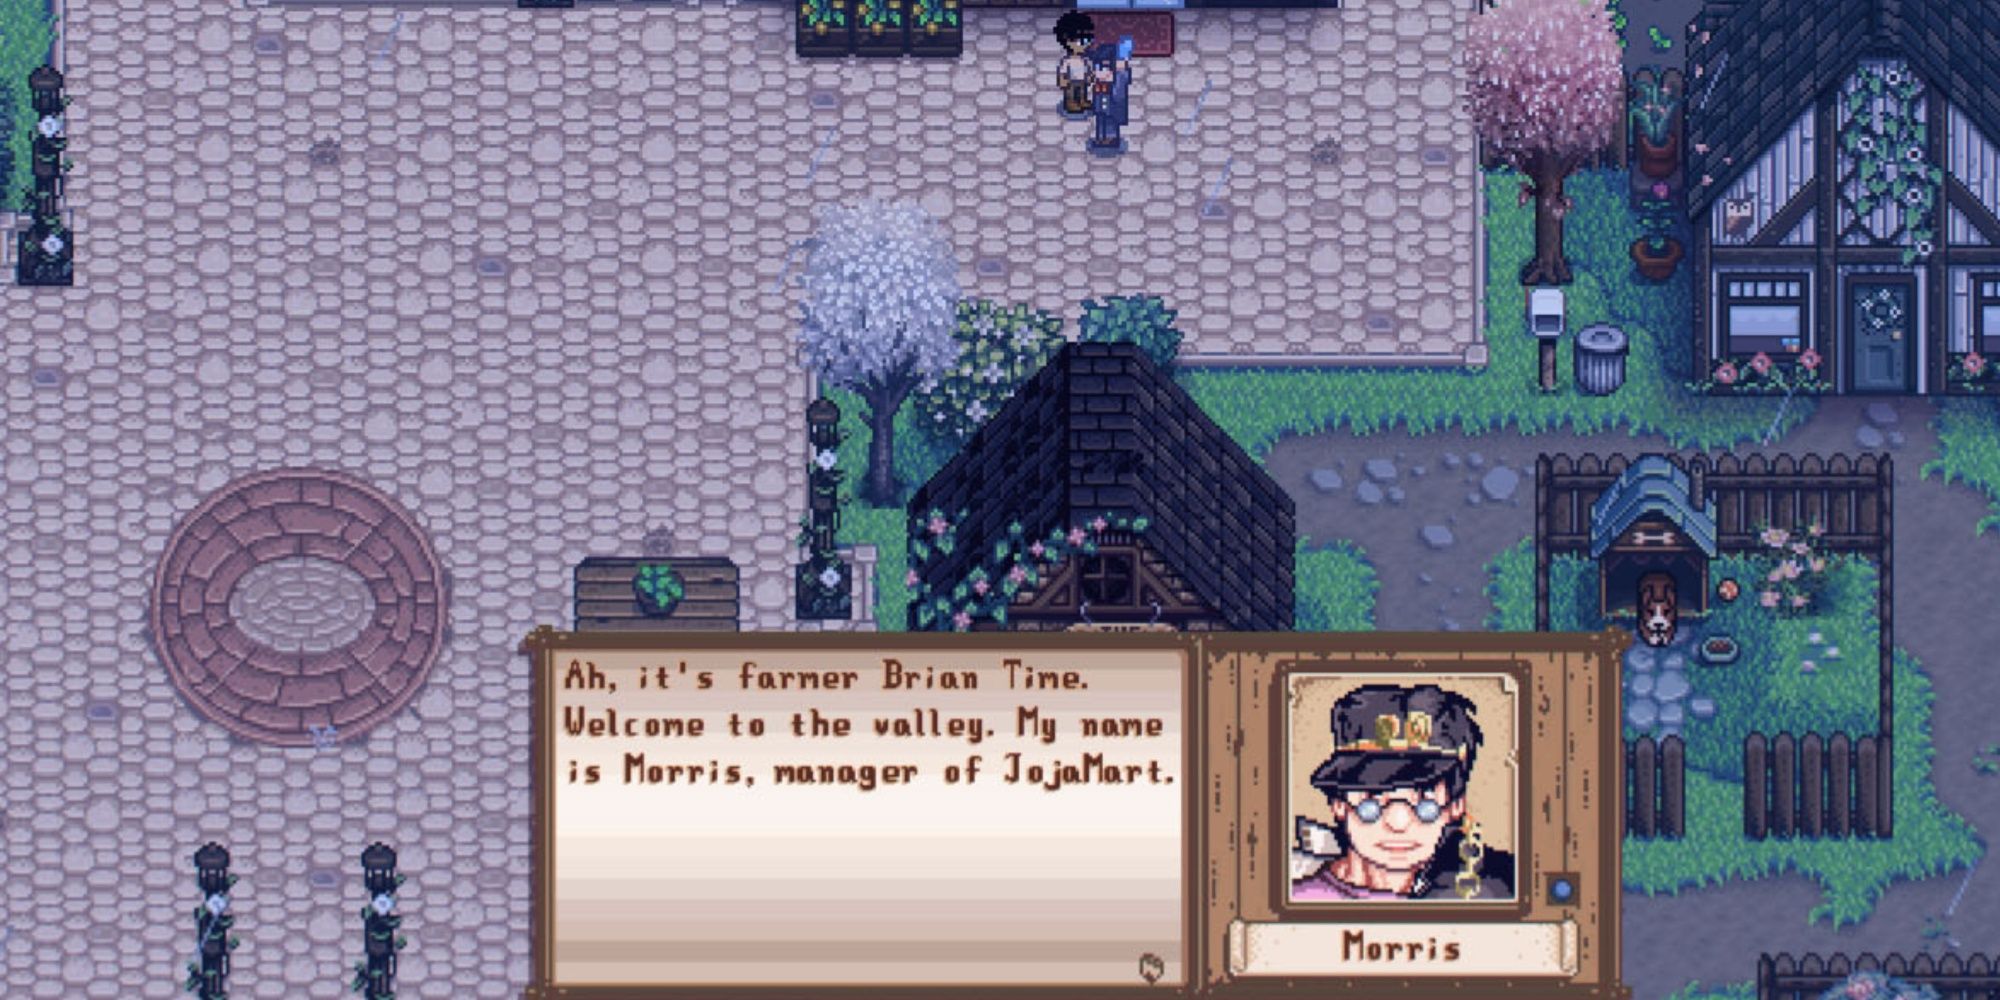 Stardew Valley, Morris in the Jojomart Mod as Jotaro Kujo introducting himself to the farmer as the manager of jojamart.